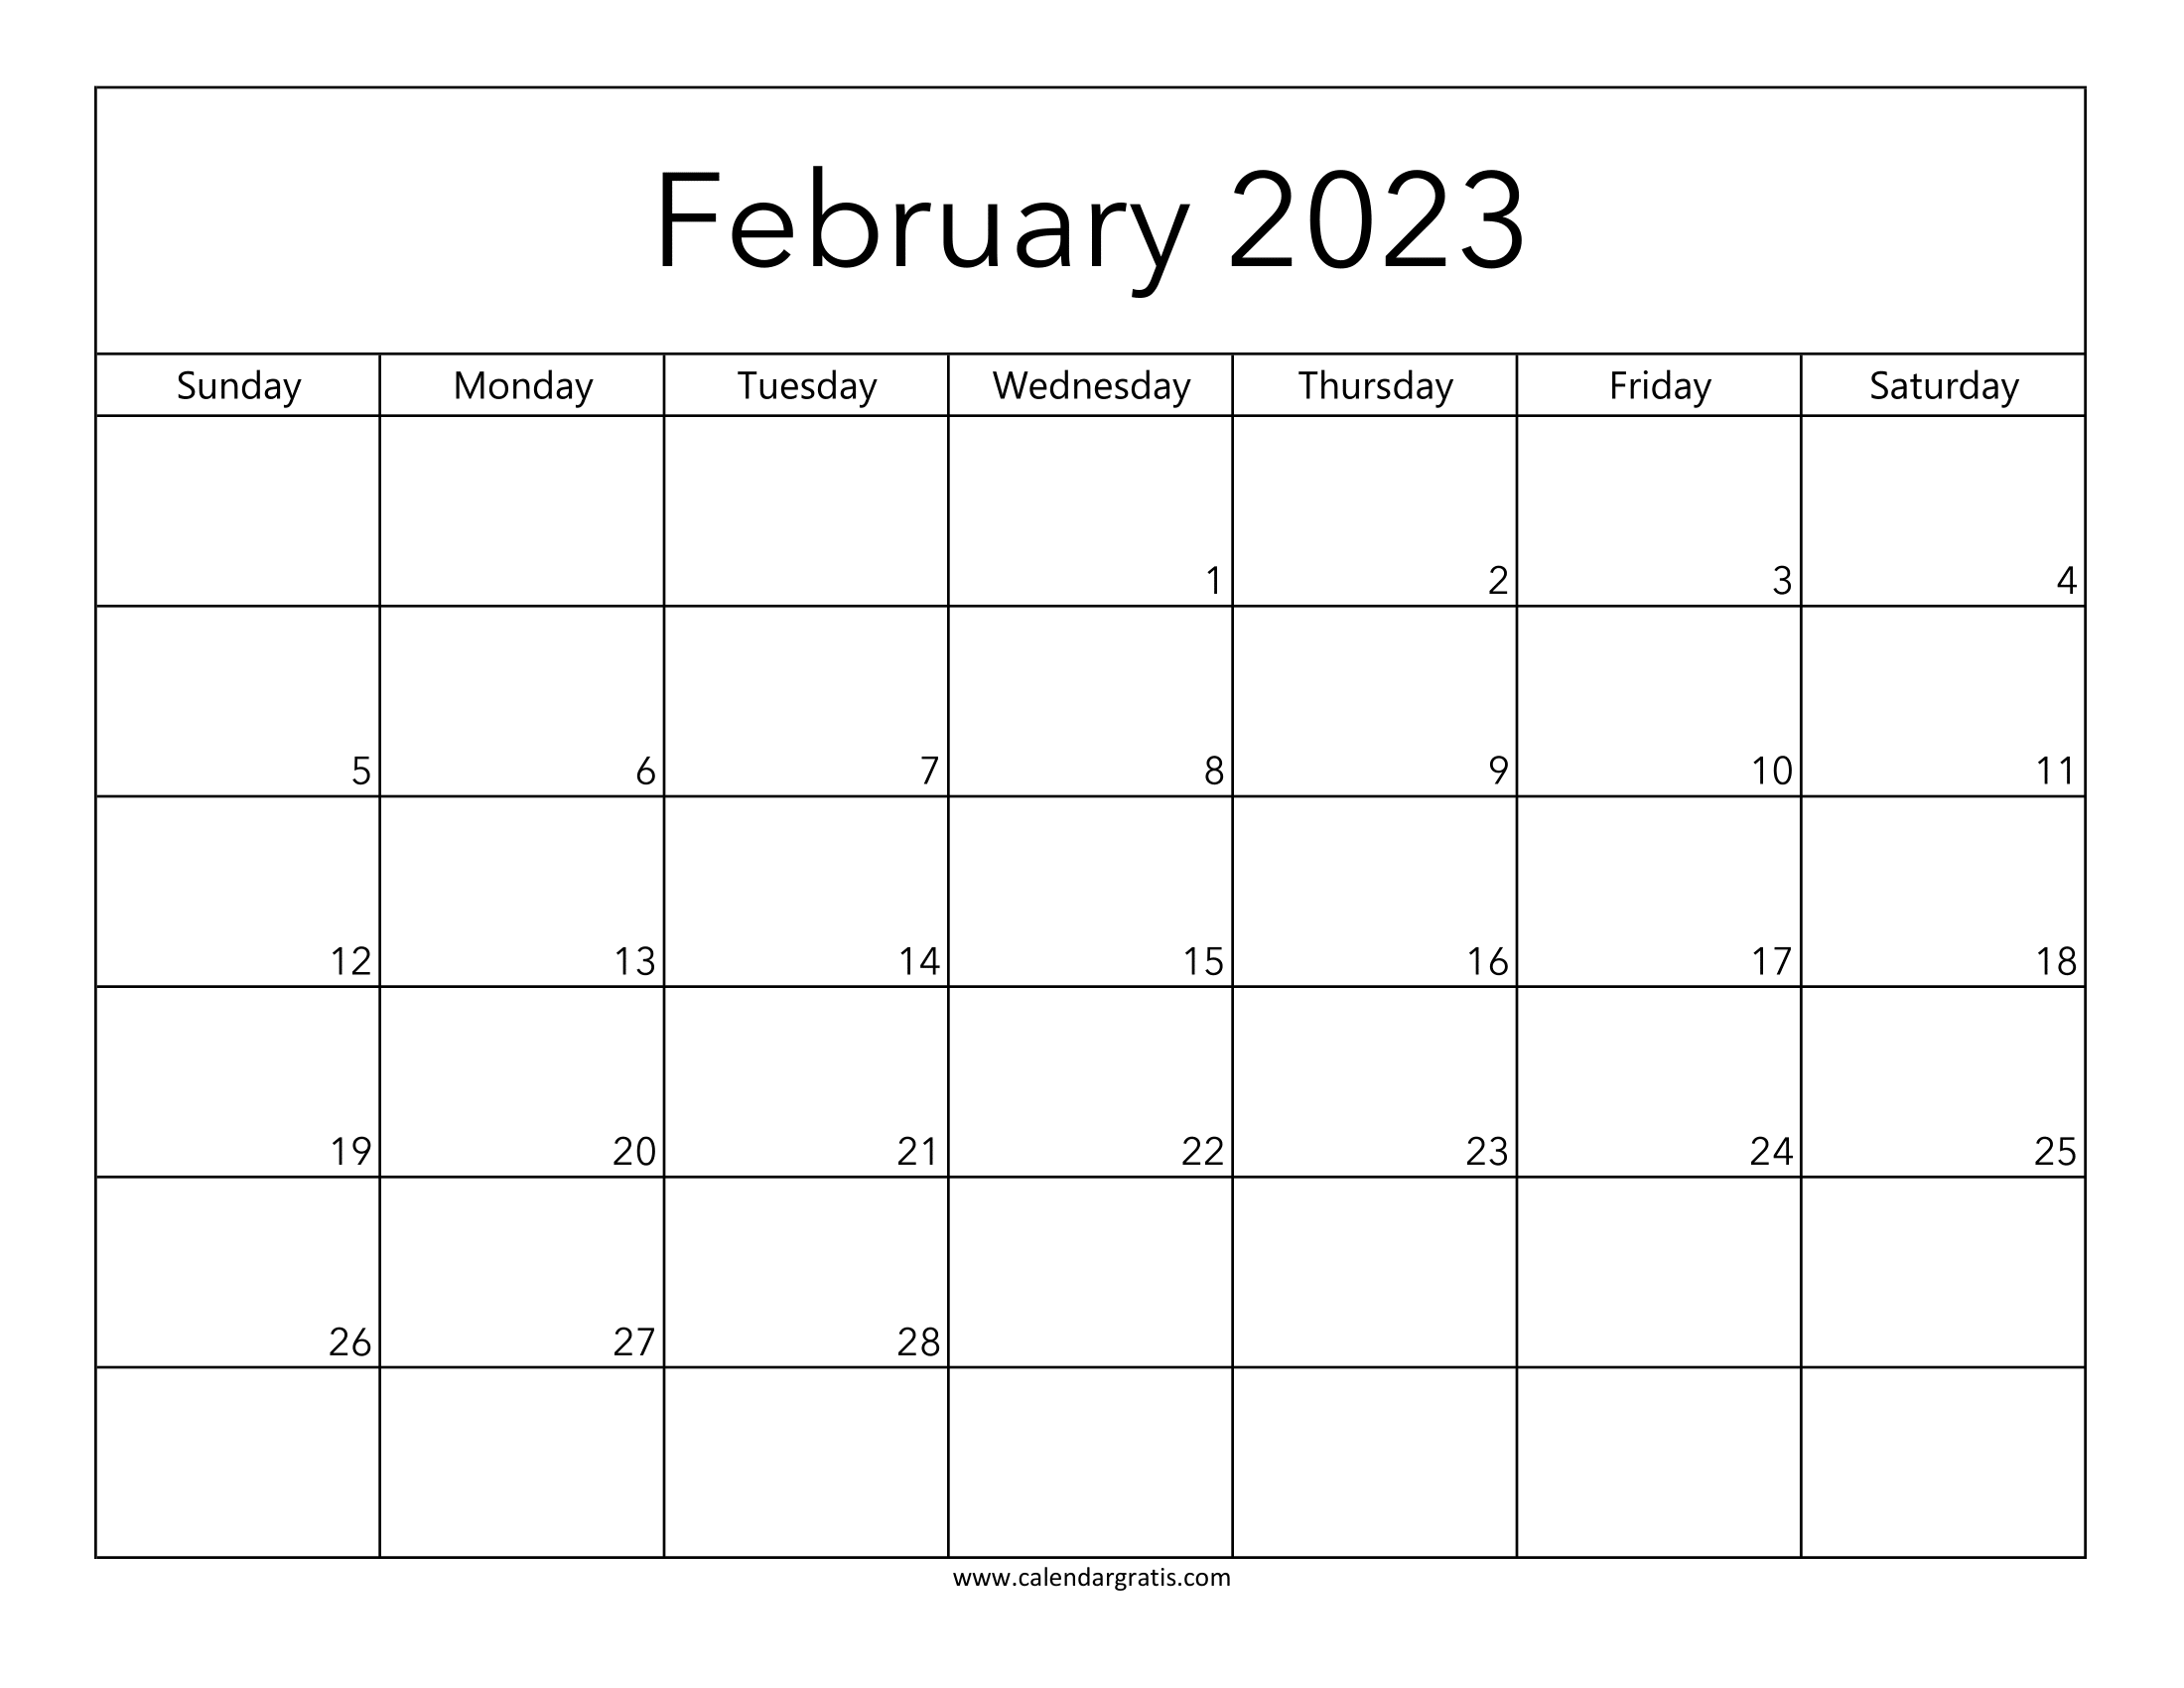 February 2023 Calendar Printable Free Template. Download the calendar and keep track of days and dates.